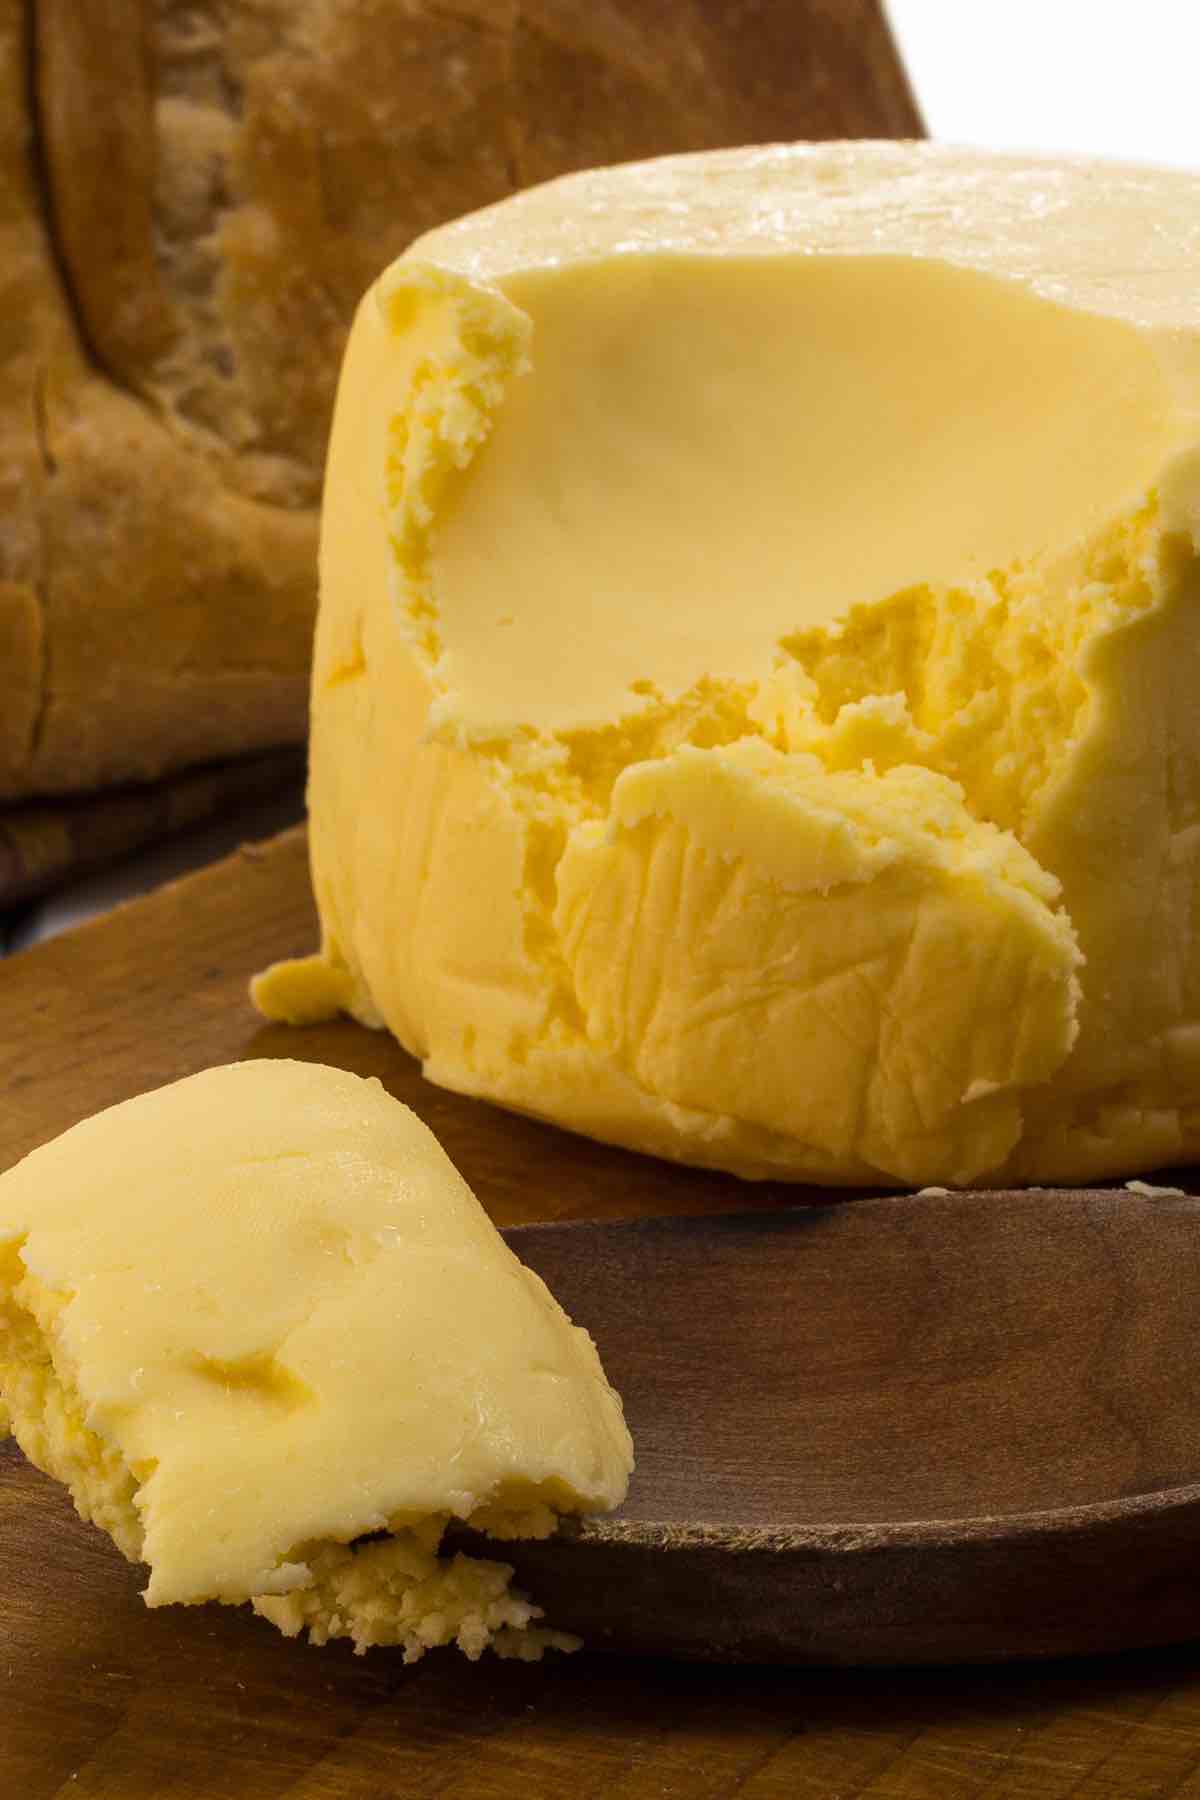 Vegan Butter is completely dairy-free and makes an excellent substitute for regular butter. This plant-based butter is creamy, melts well and can be used for baking and cooking.